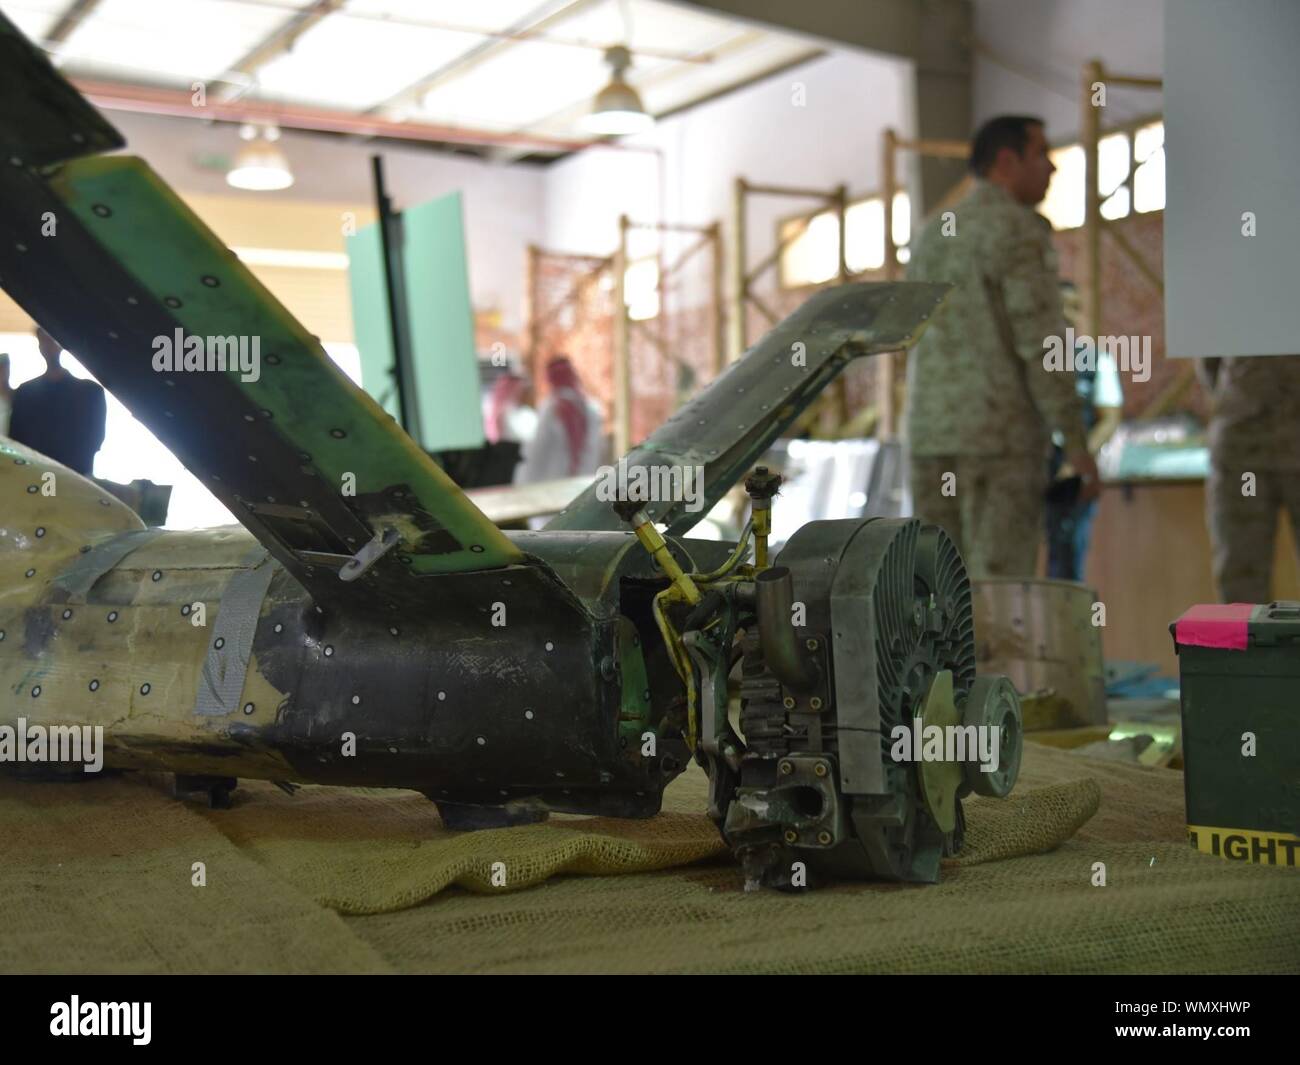 (190905) -- RIYADH, Sept. 5, 2019 (Xinhua) -- An intercepted Houthi drone is seen at a military facility in Al Kharj, south of Riyadh, Saudi Arabia, on Sept. 5, 2019. Saudi-led coalition involved in a war in Yemen on Thursday intercepted a drone launched by Houthis towards Saudi border city Khamis Mushayt, Saudi Press Agency reported. (Xinhua/Tu Yifan) Stock Photo